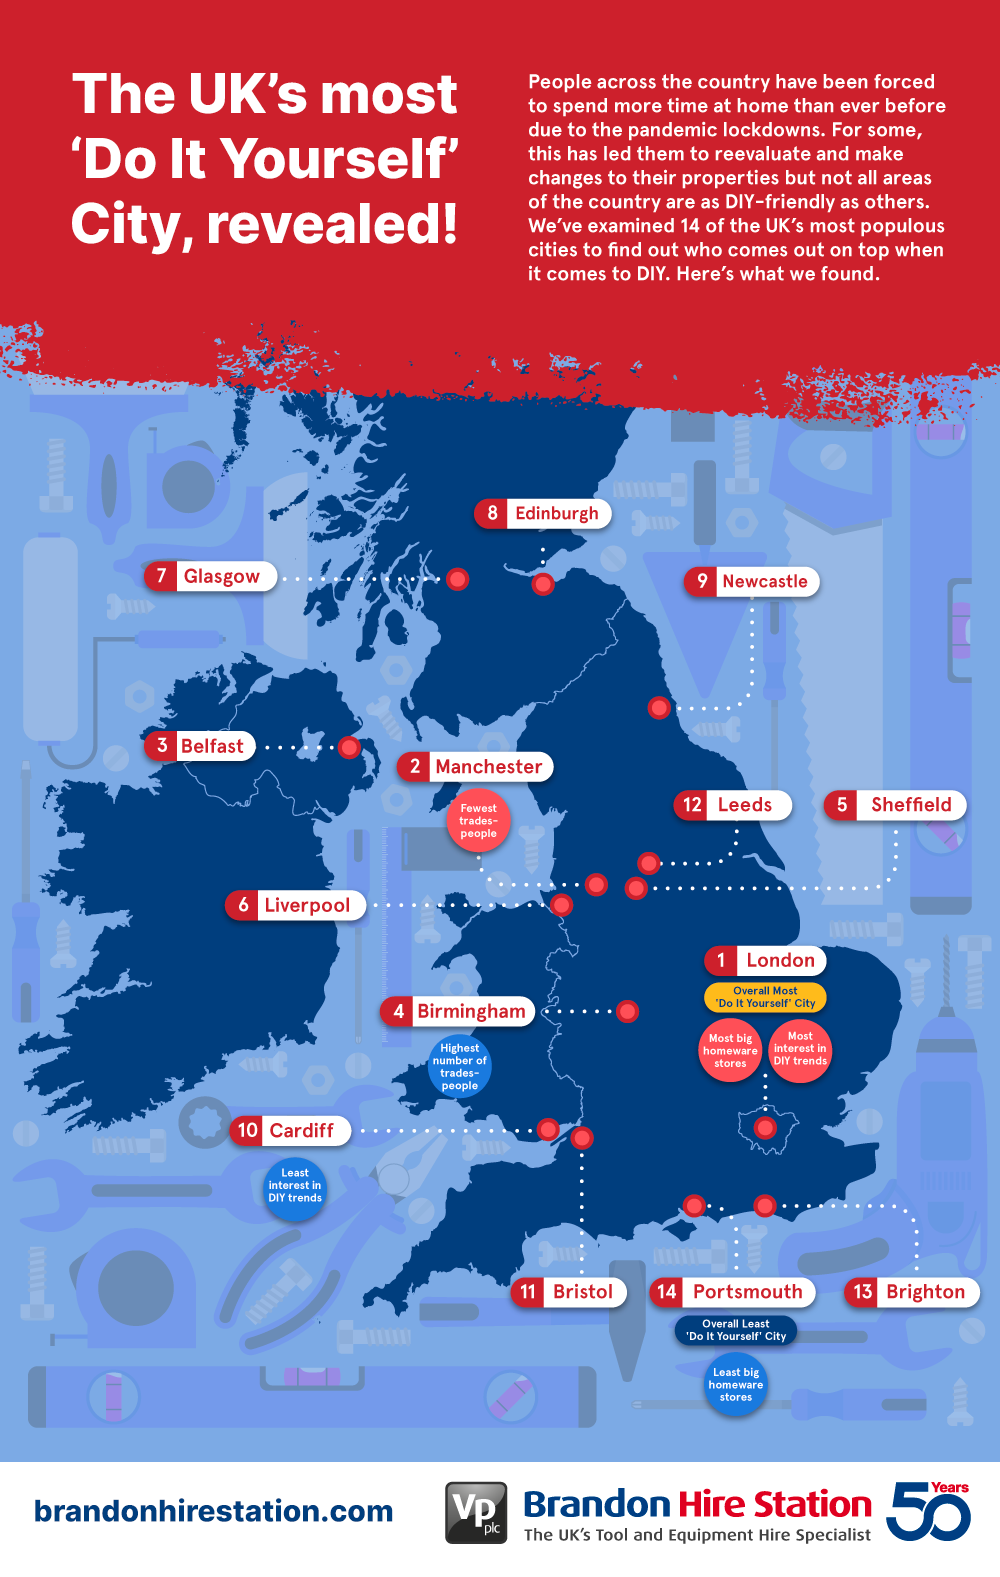 the UK’s most Do It Yourself city, revealed